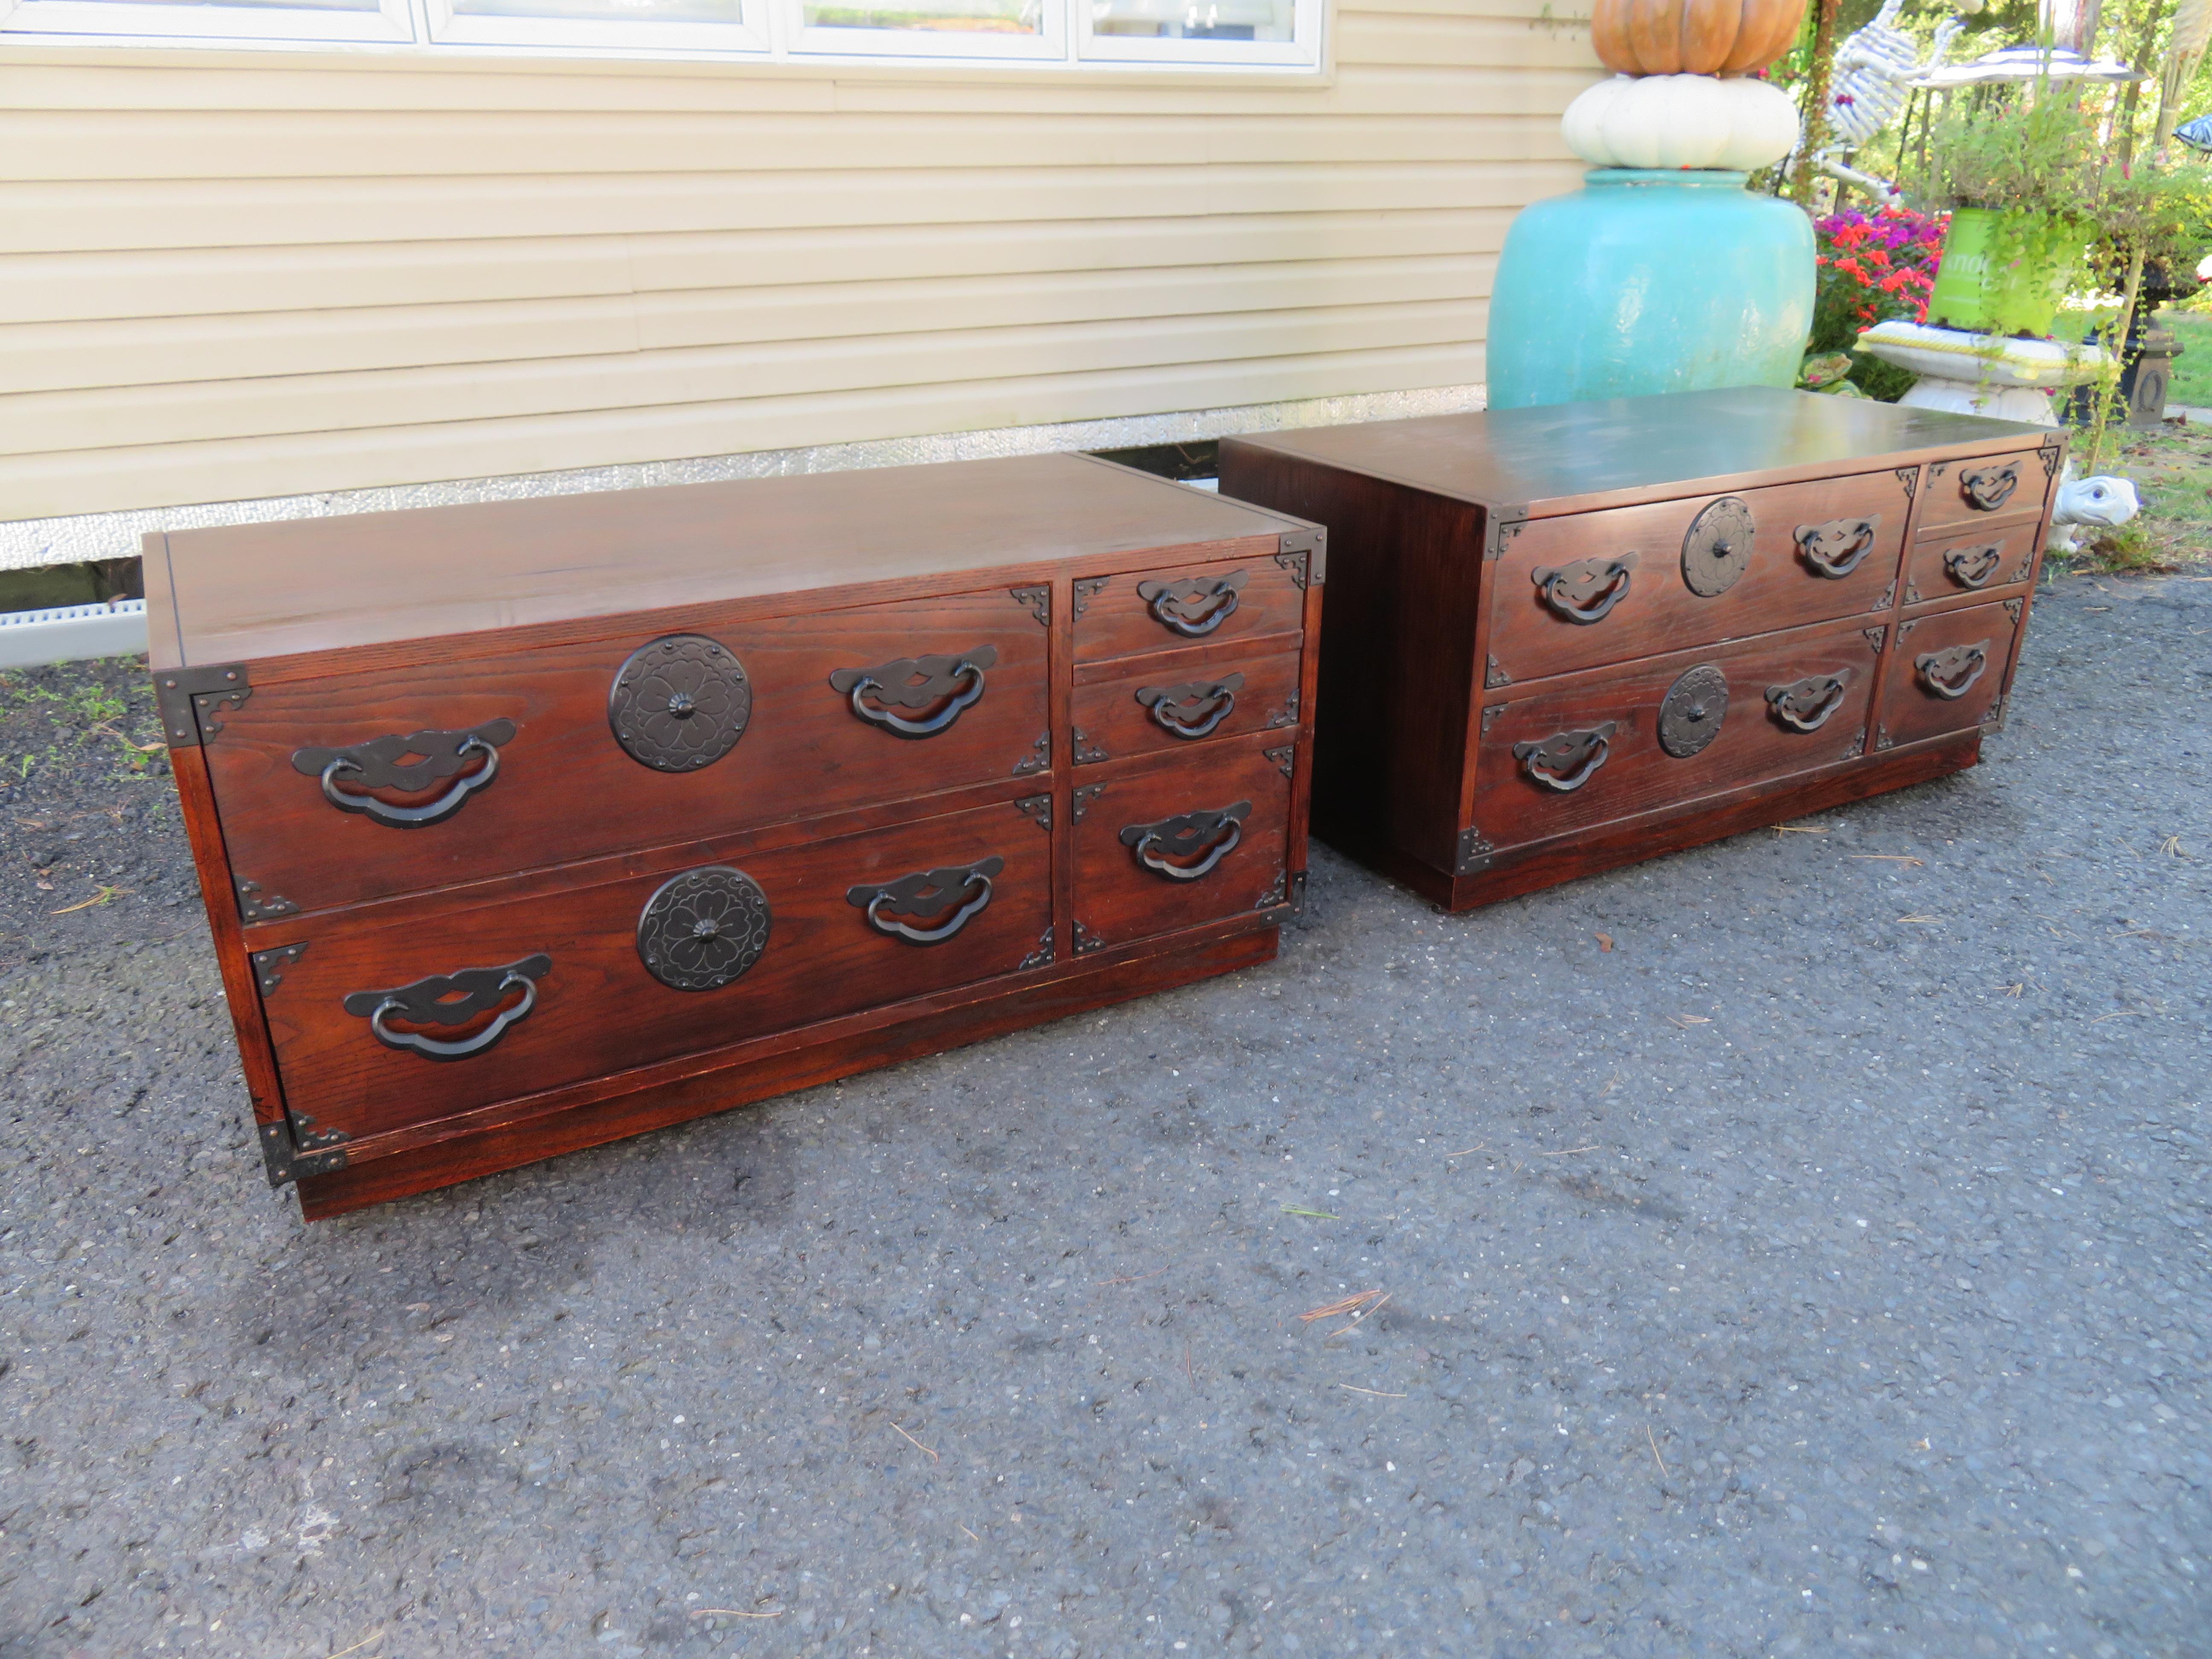 Pair of amazingly beautiful Japanese Tansu small chests or nightstands by Baker. Dark stained oak with fantastic Japanese inspired hardware. They have a time-worn patina with splendid charm. I love the vintage look of these- gives your interior real